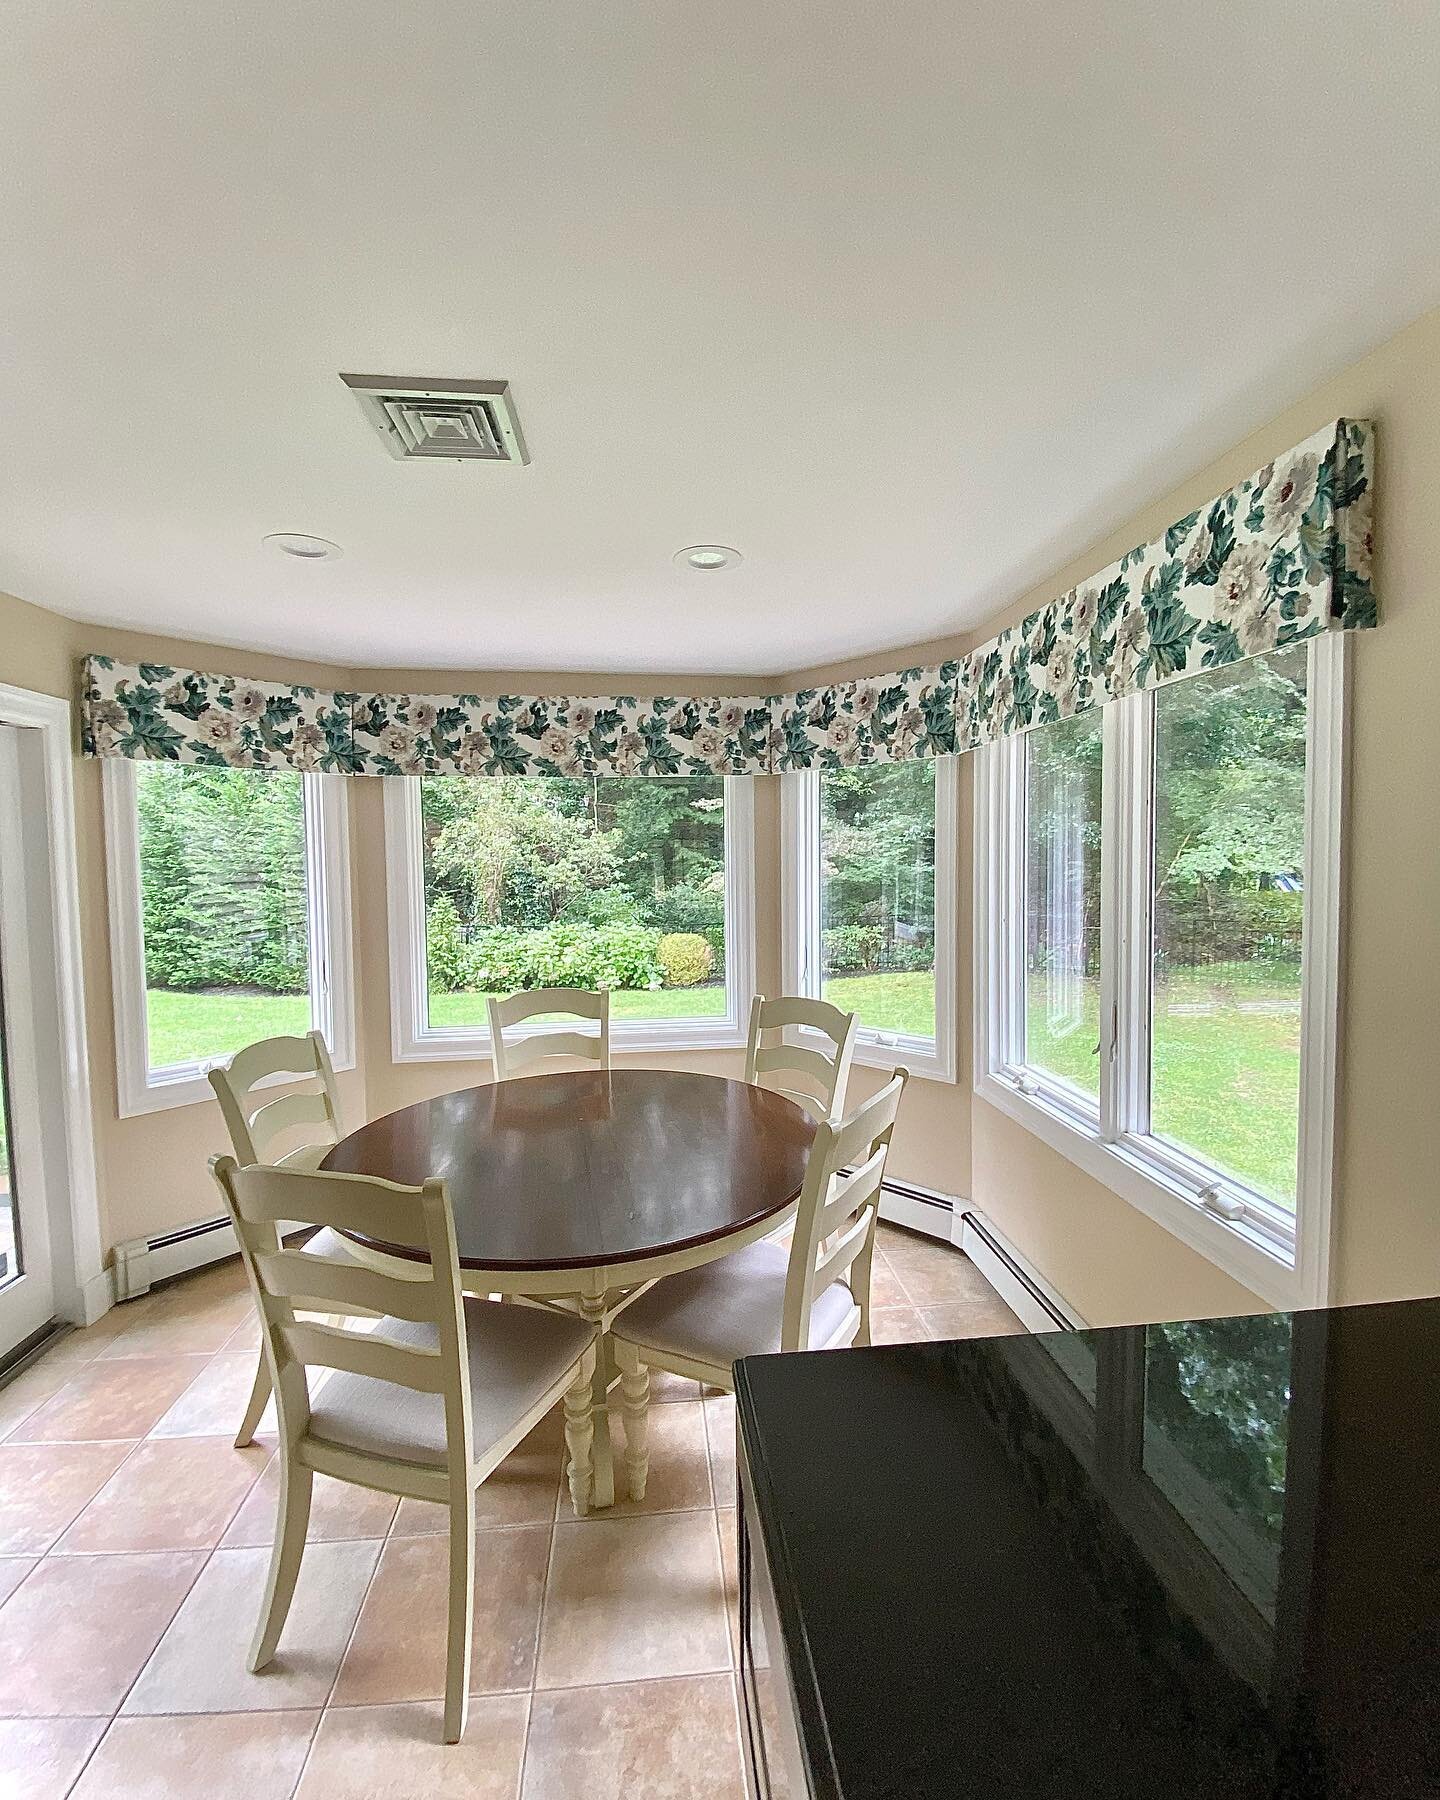 I love this valance project for a lot of reasons, but you already know how I feel about window treatments&hellip;

&hellip;details change everything!

@fabricut #leafygreens